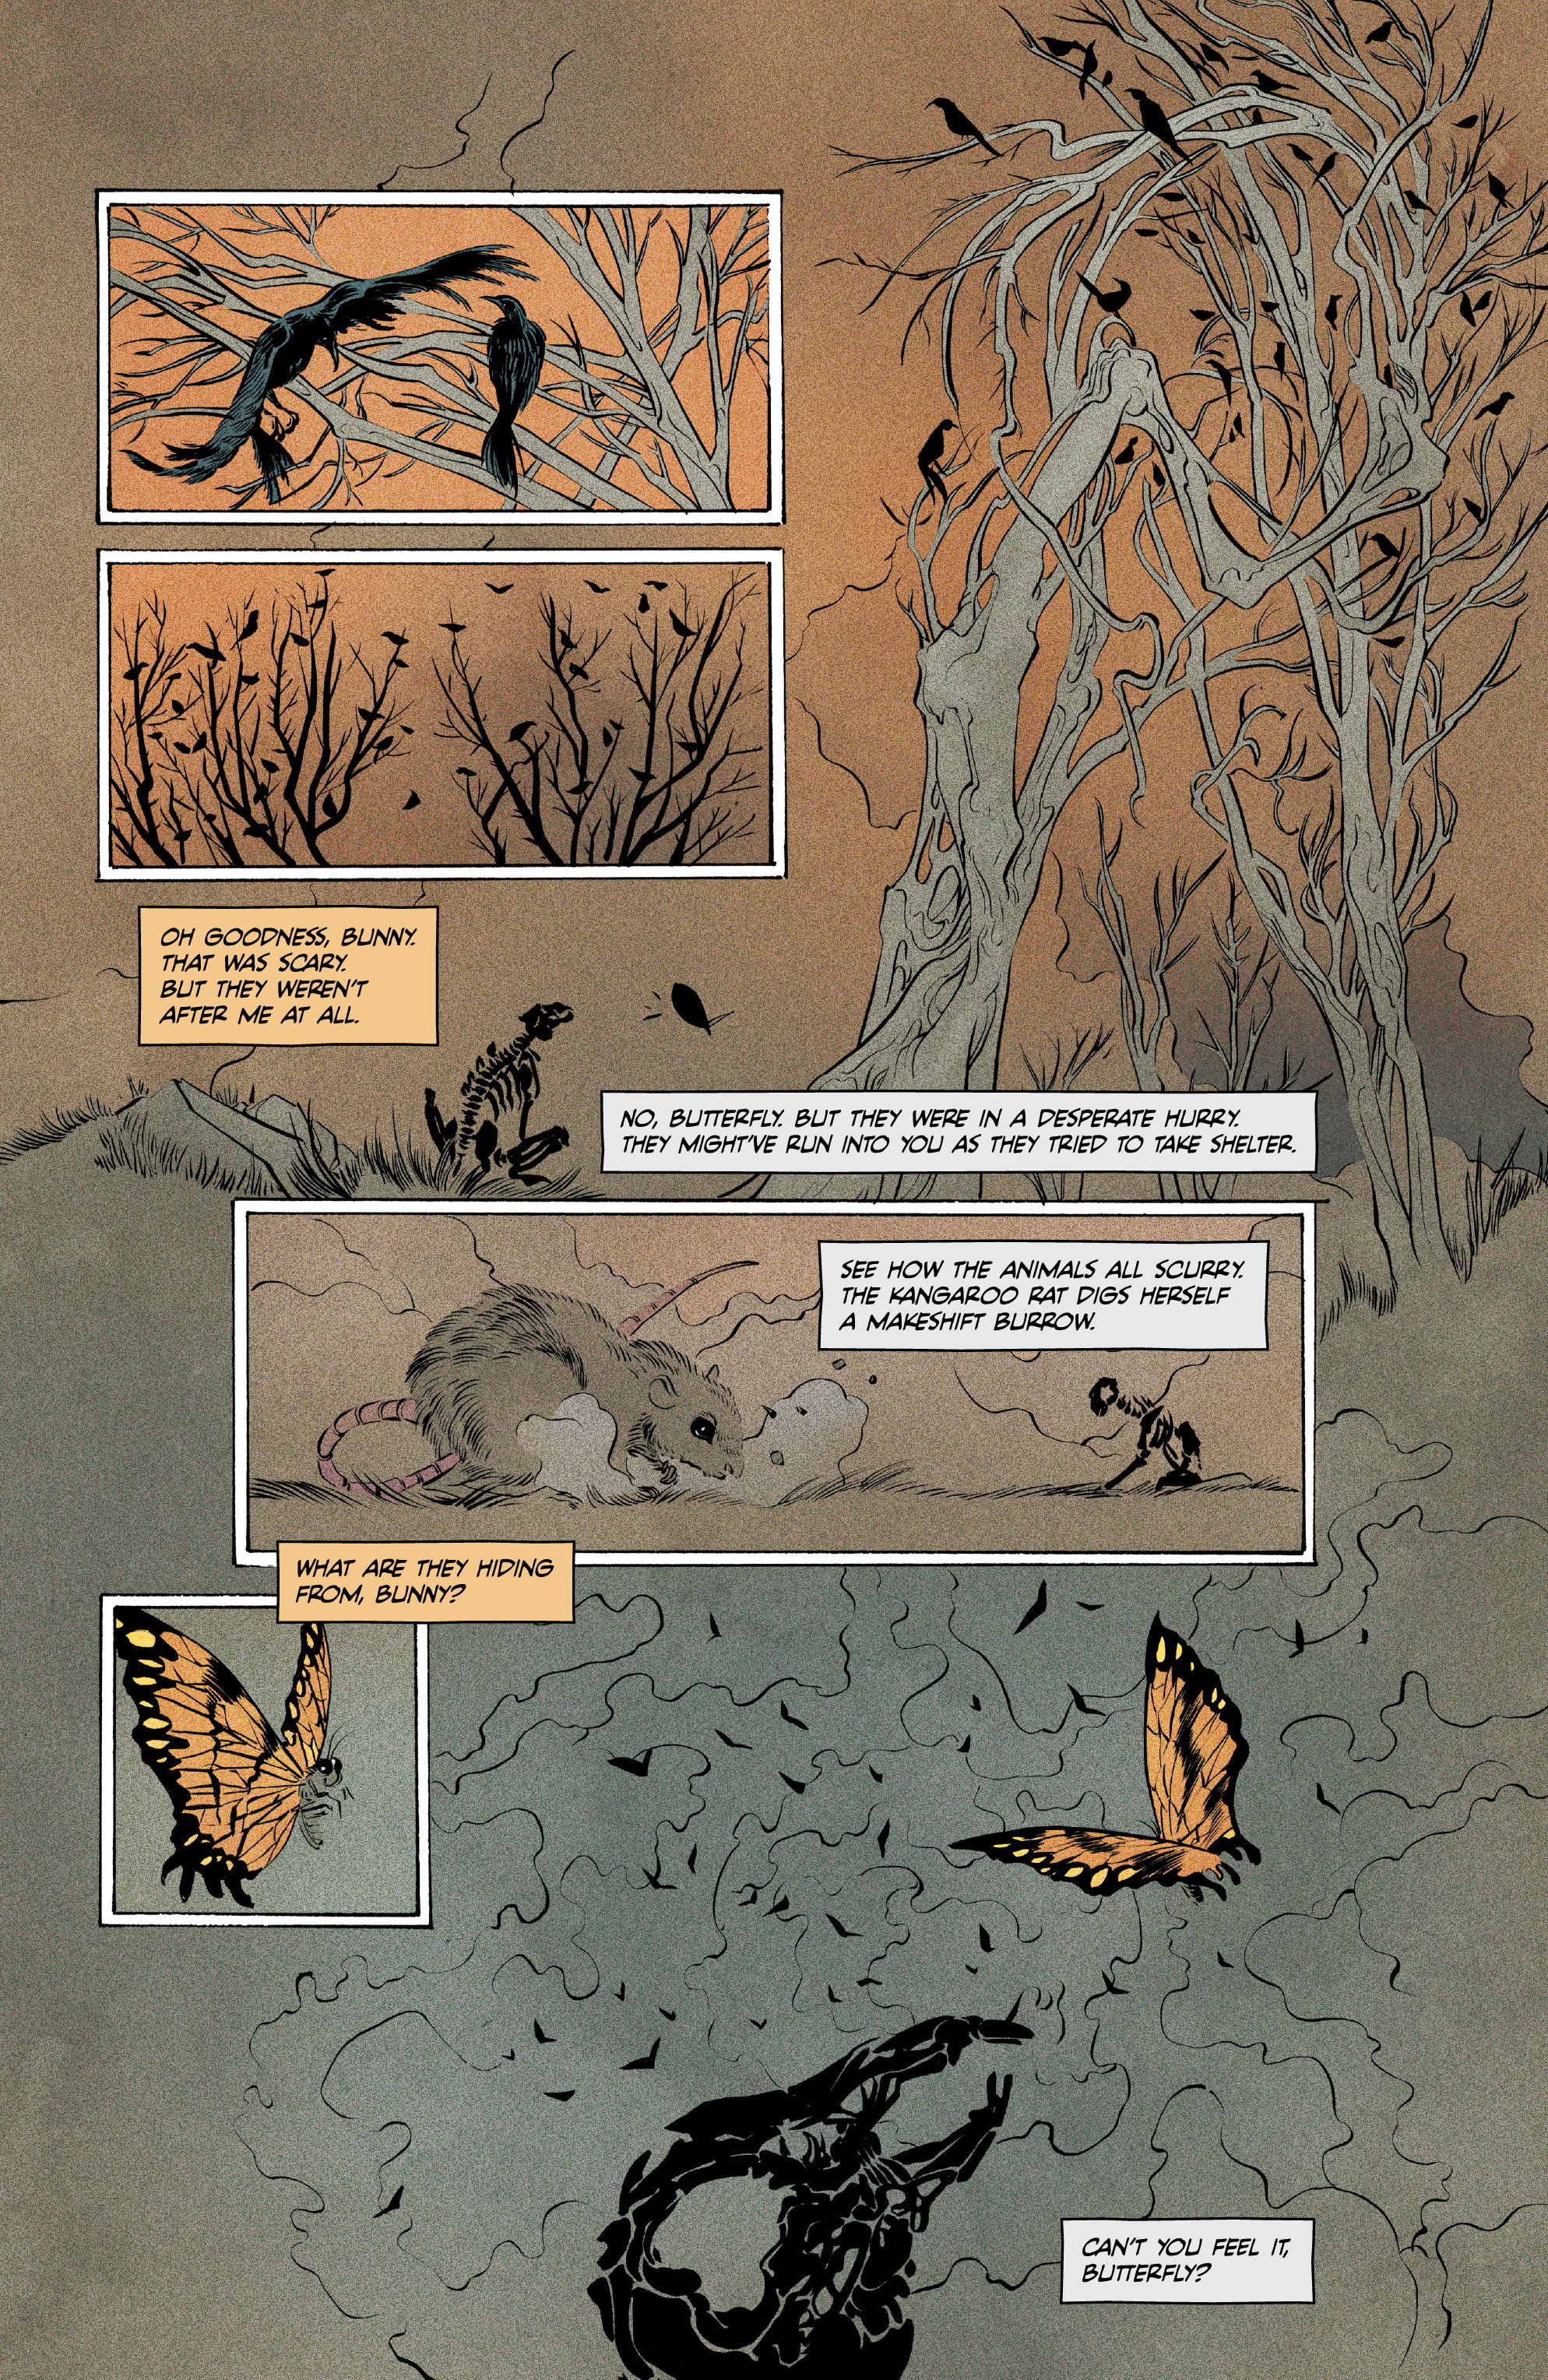 Pretty Deadly: The Rat (2019-): Chapter 5 - Page 4